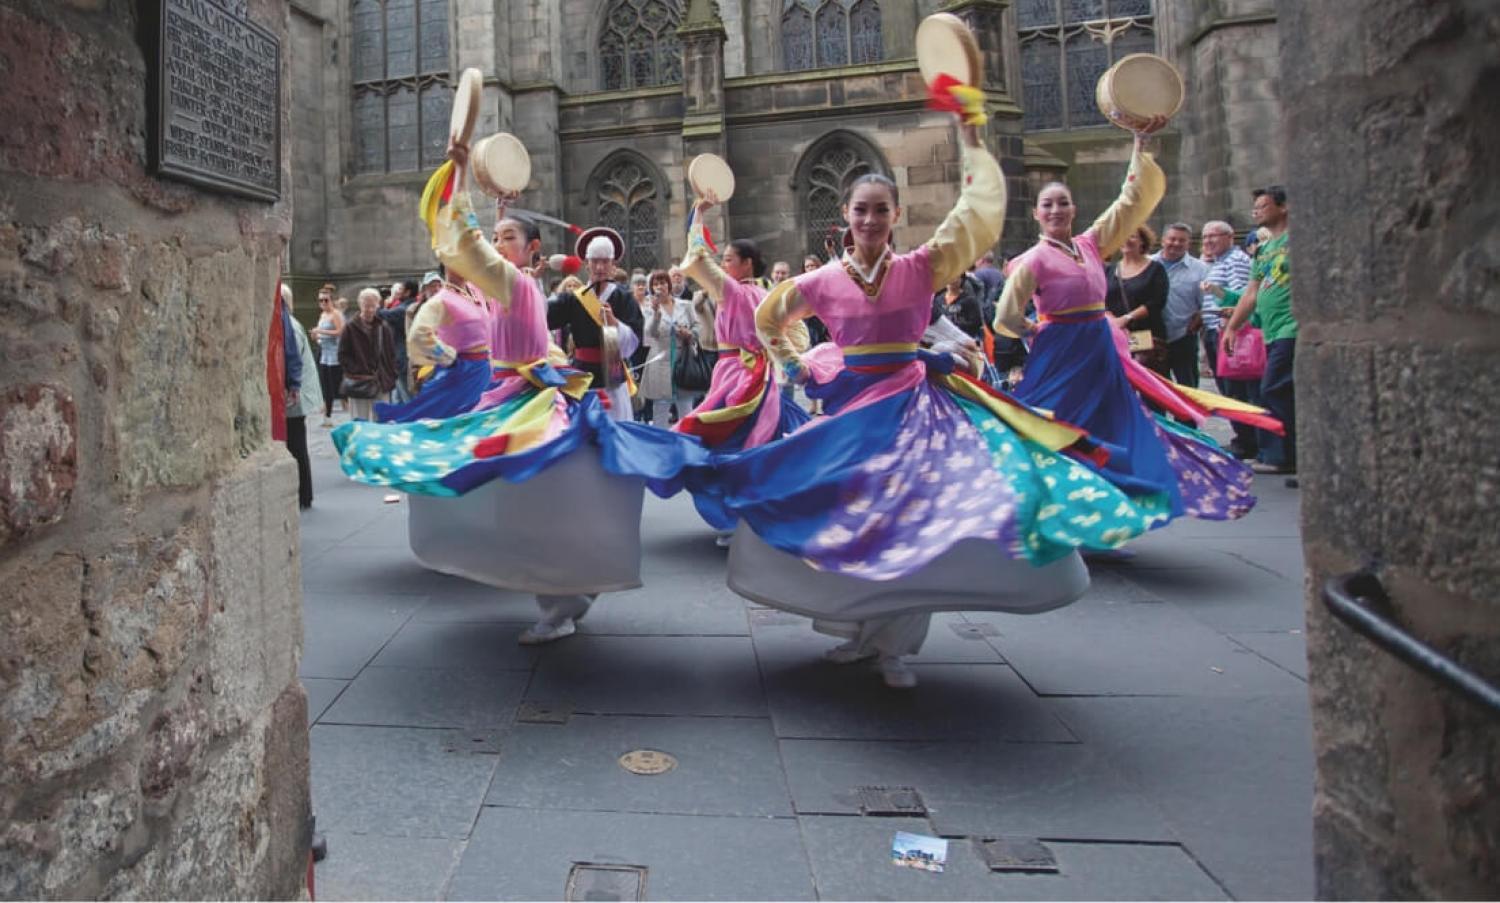 Five dancers in full skirts and with tambourines perform for a crowd on the Royal Mile at the Edinburgh Festival Fringe